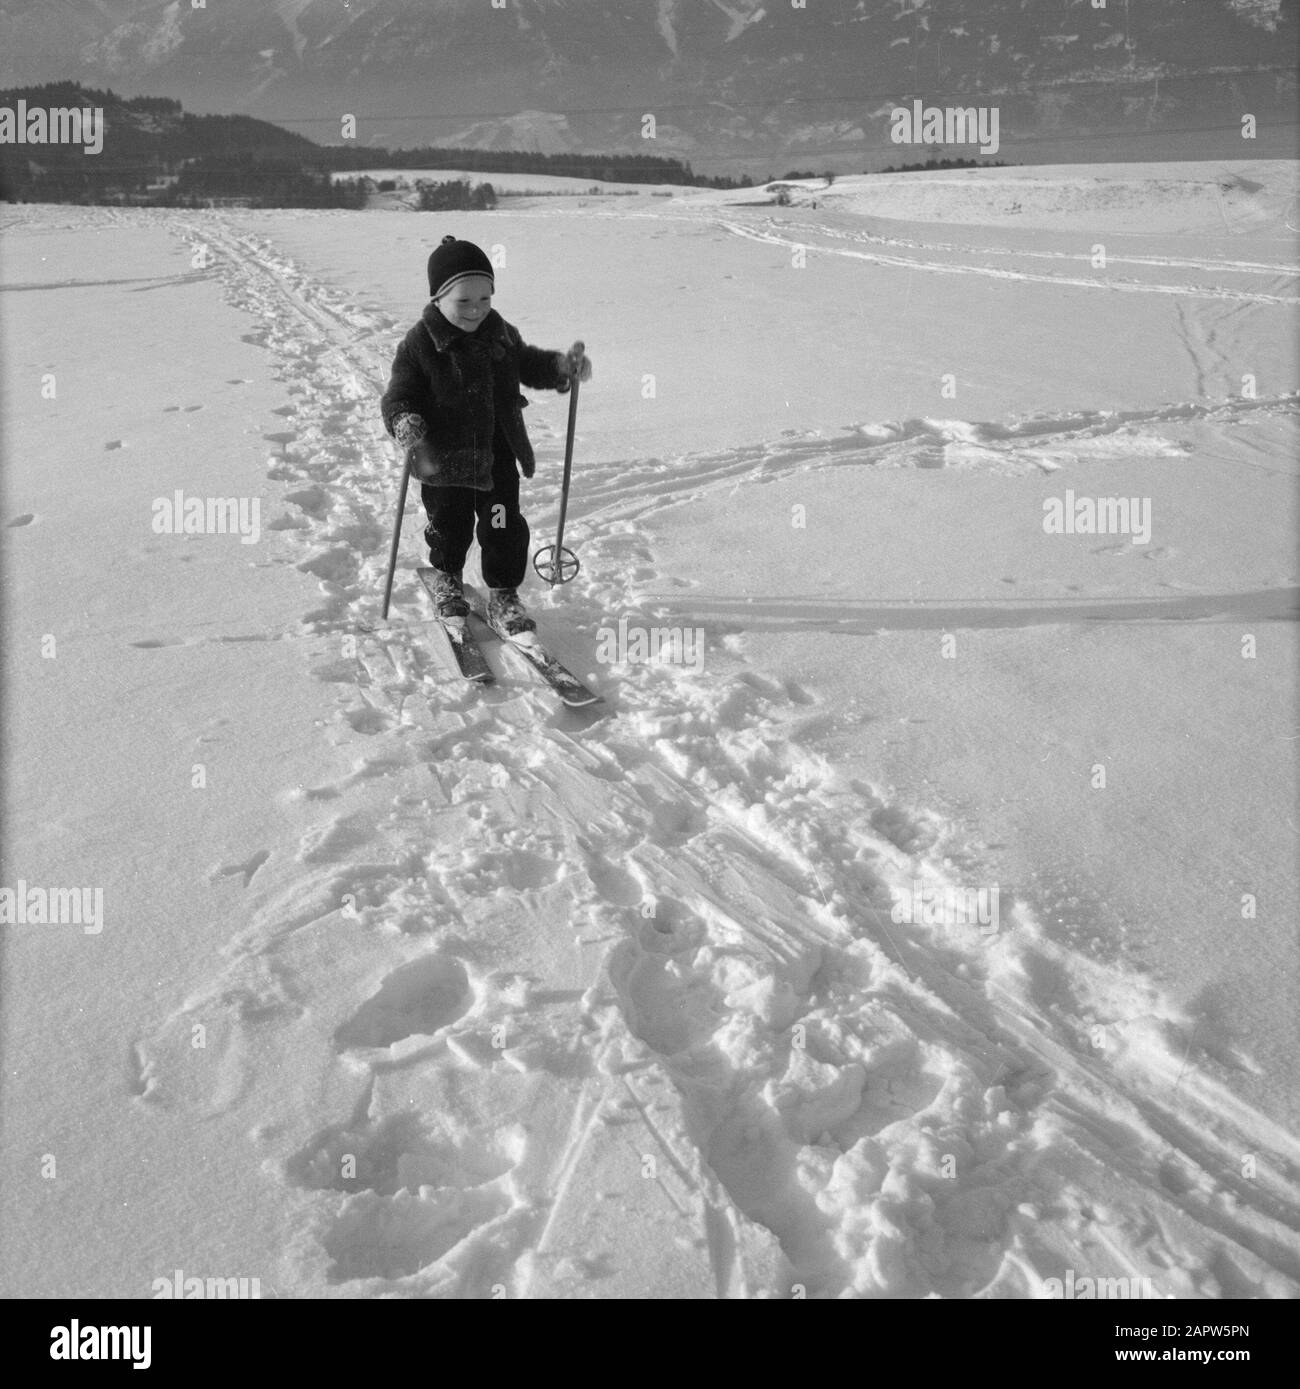 Winter in Tyrol  Child with skis in the snow with the Karwendel Mountains in the background Date: January 1960 Location: Austria, Sistrans, Tyrol Keywords: mountains, landscapes, cross-country skiing, skiing, snow, winter, winter sports Stock Photo